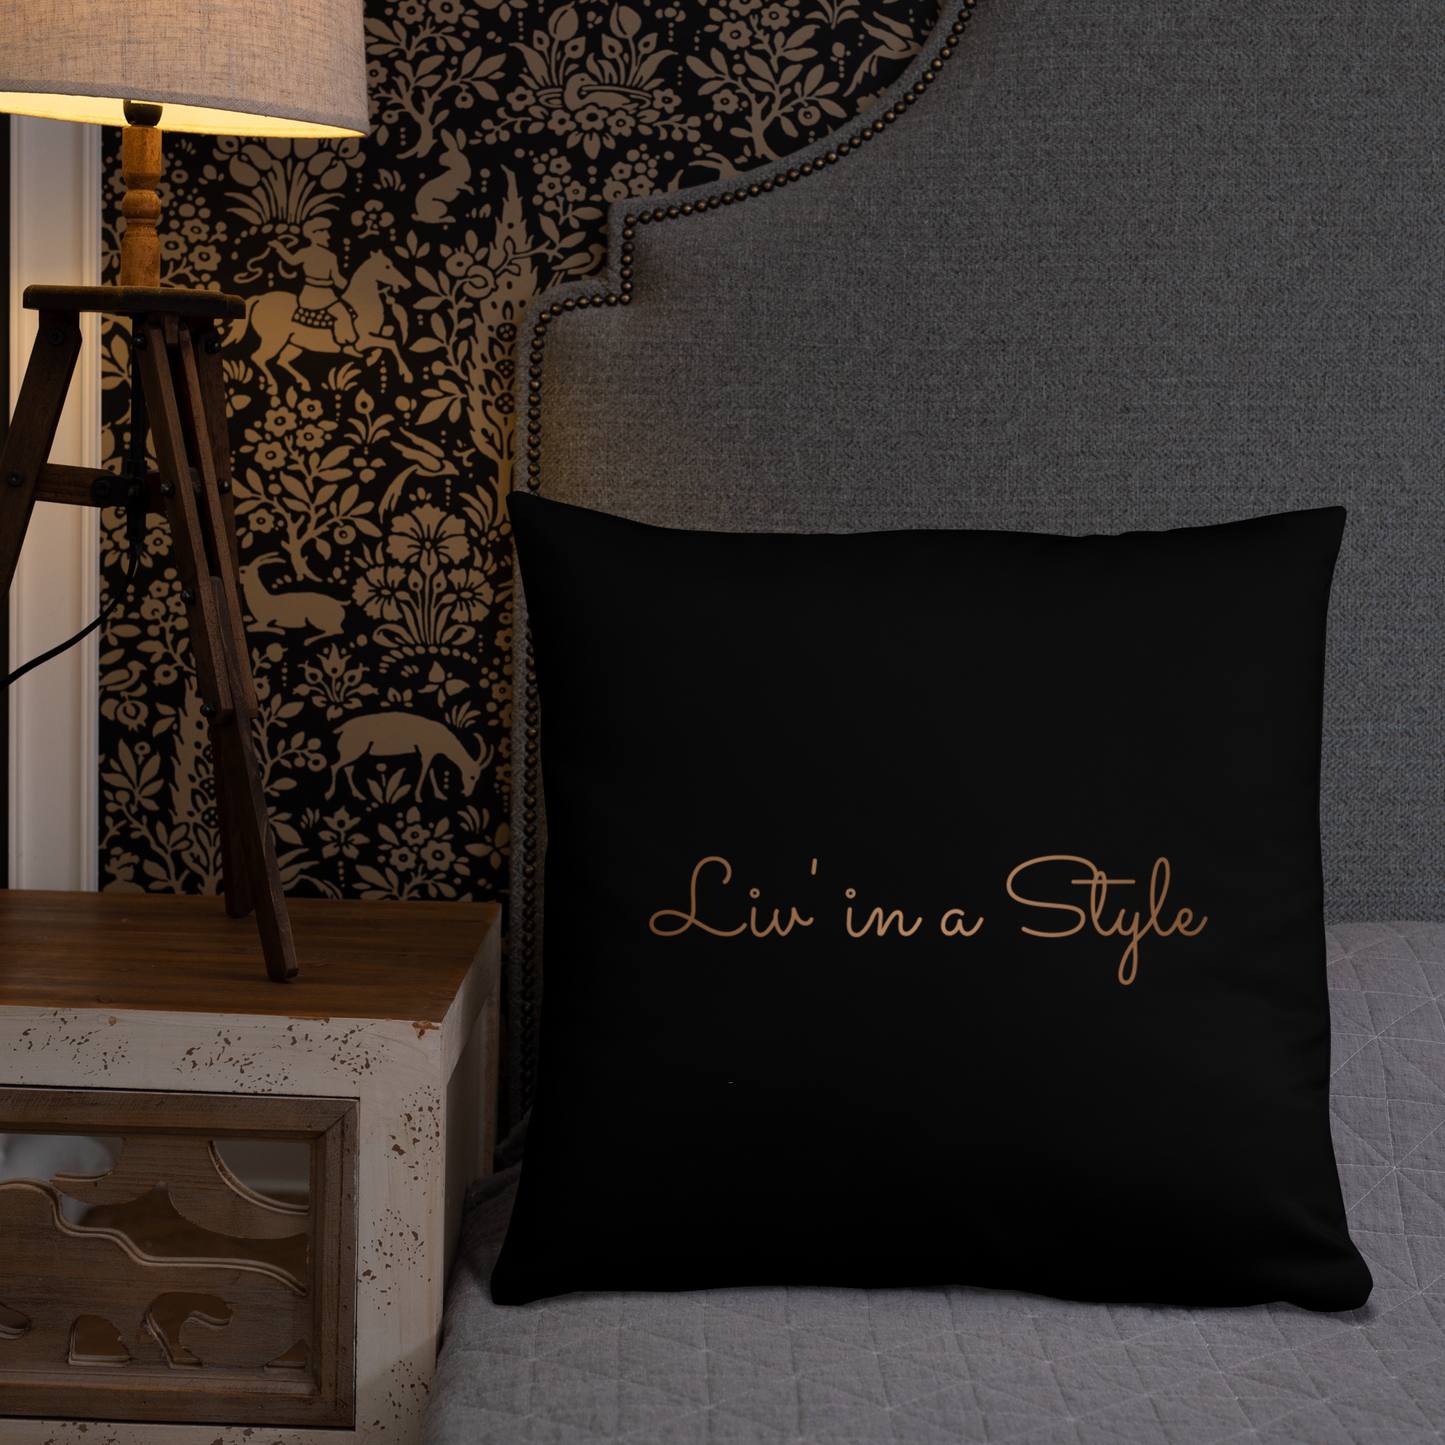 Pillow that Lives in a Style